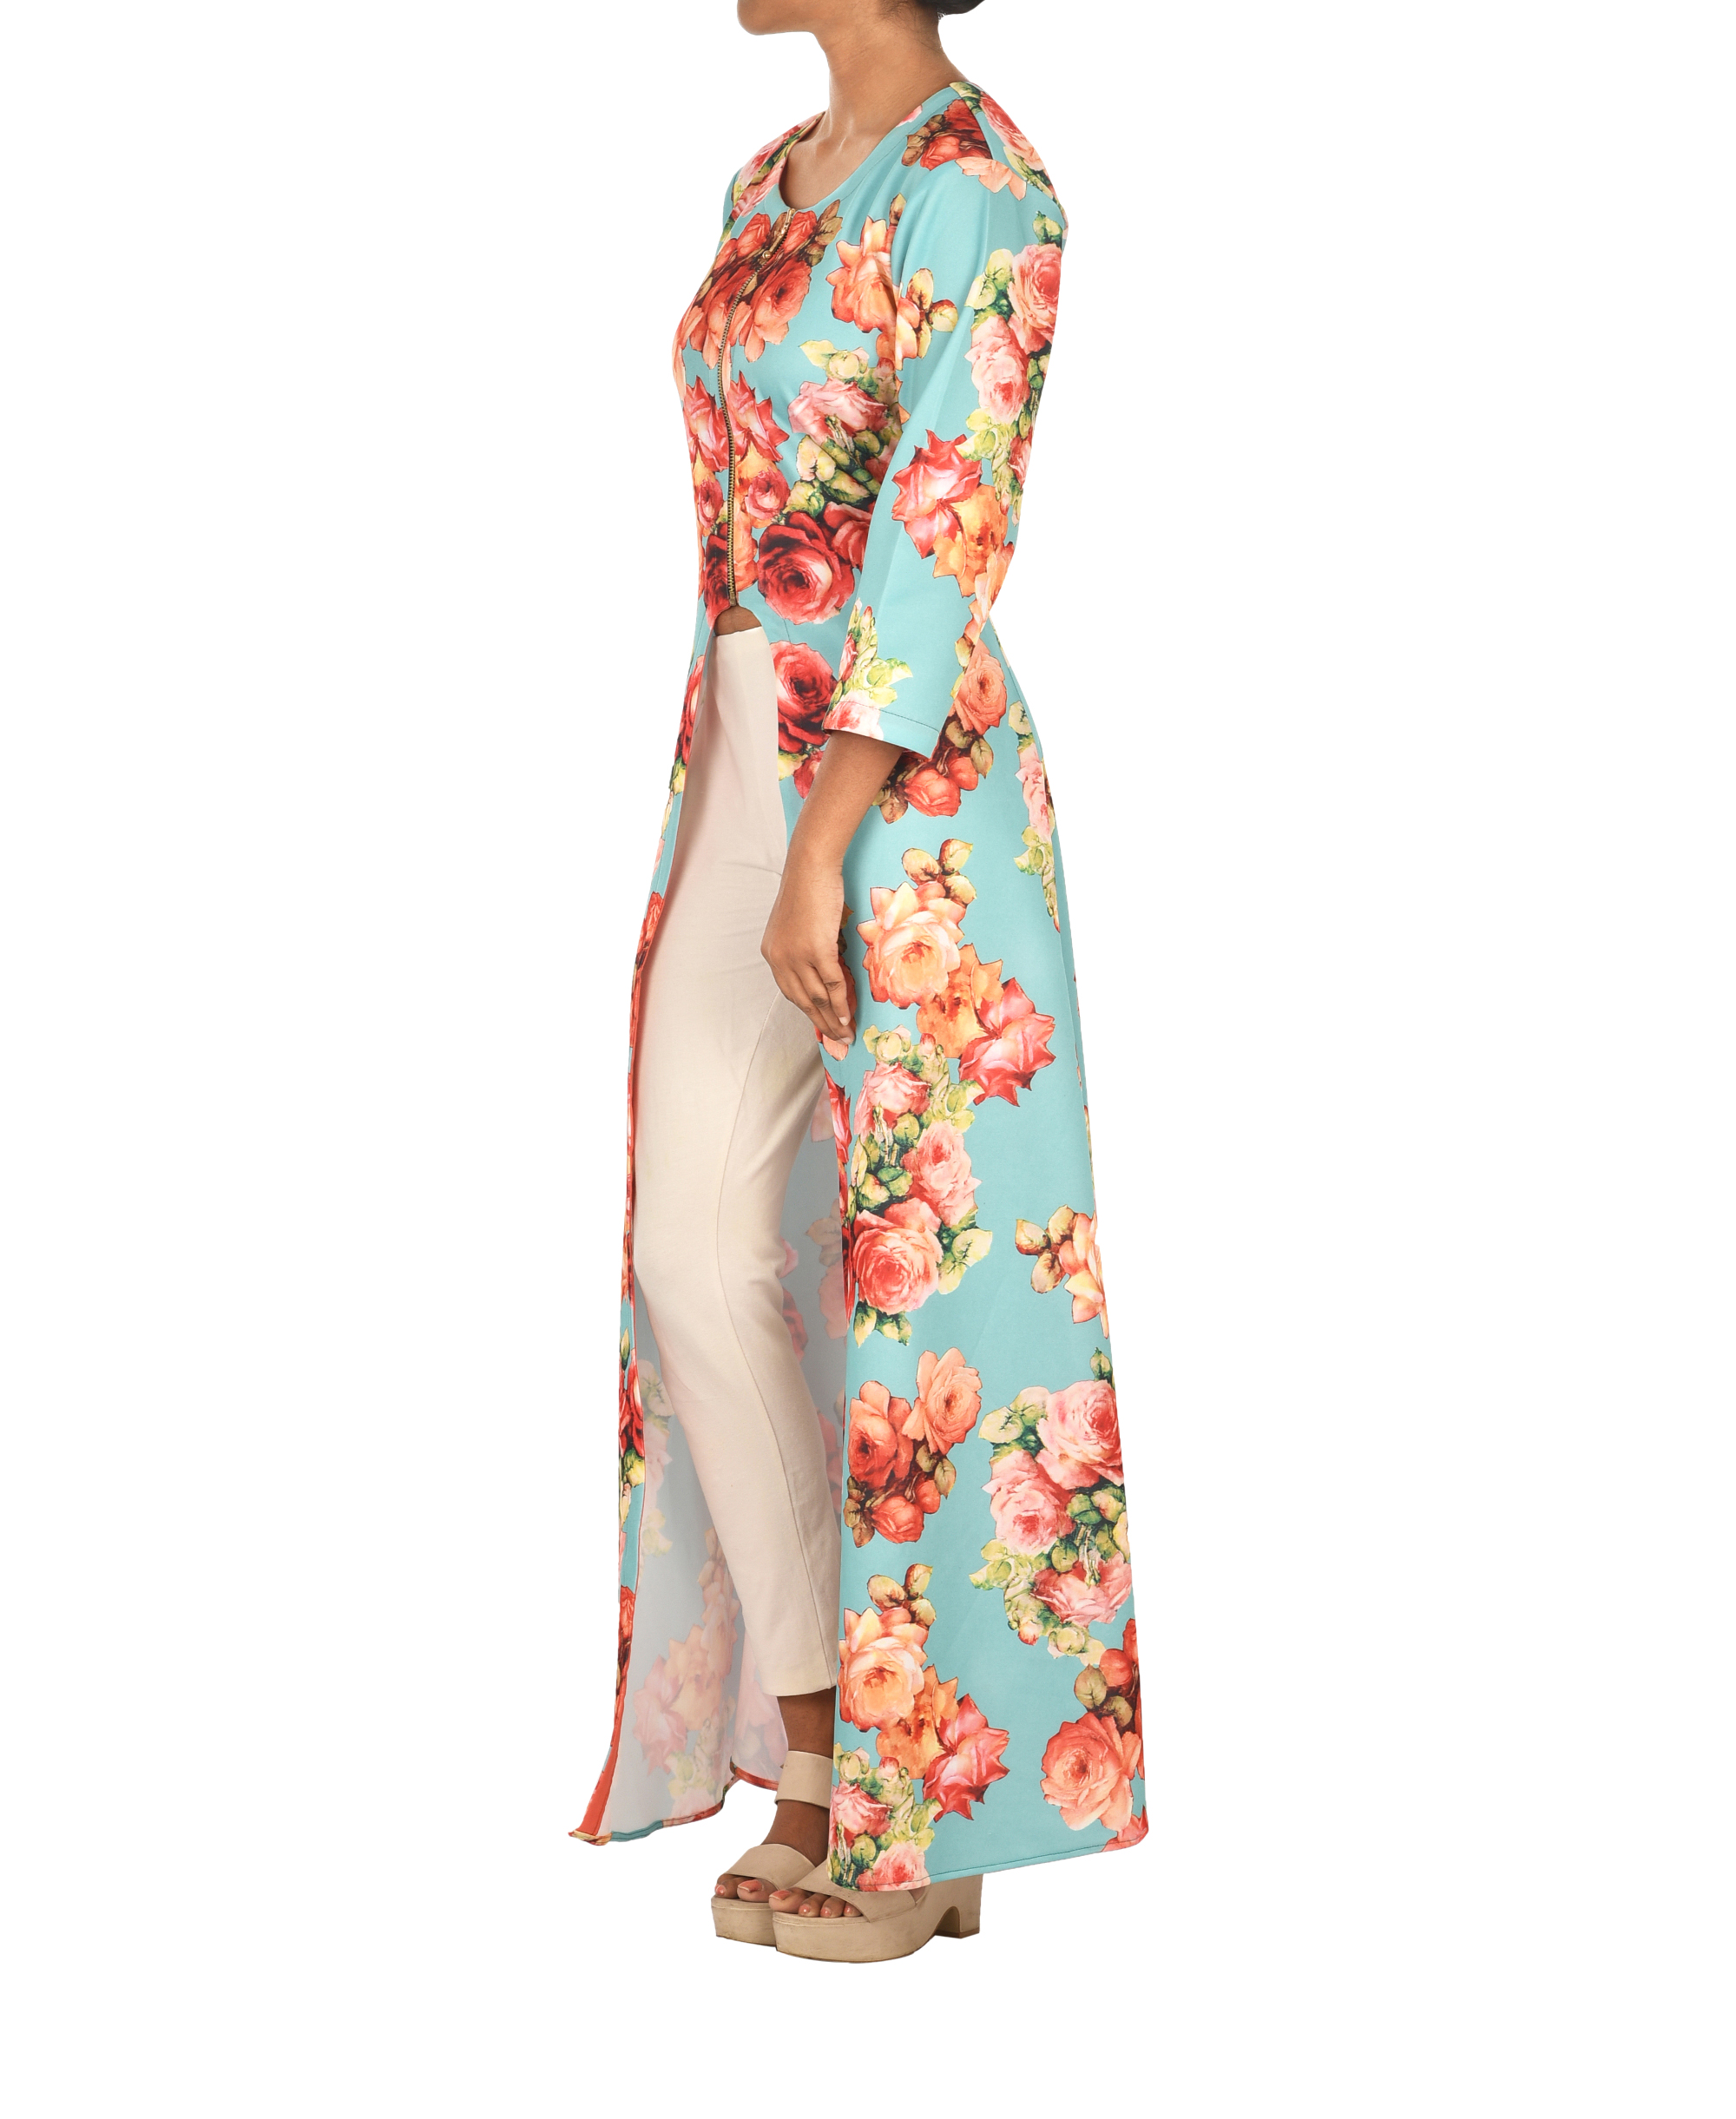 Turquoise floral cape by Inaayat | The Secret Label